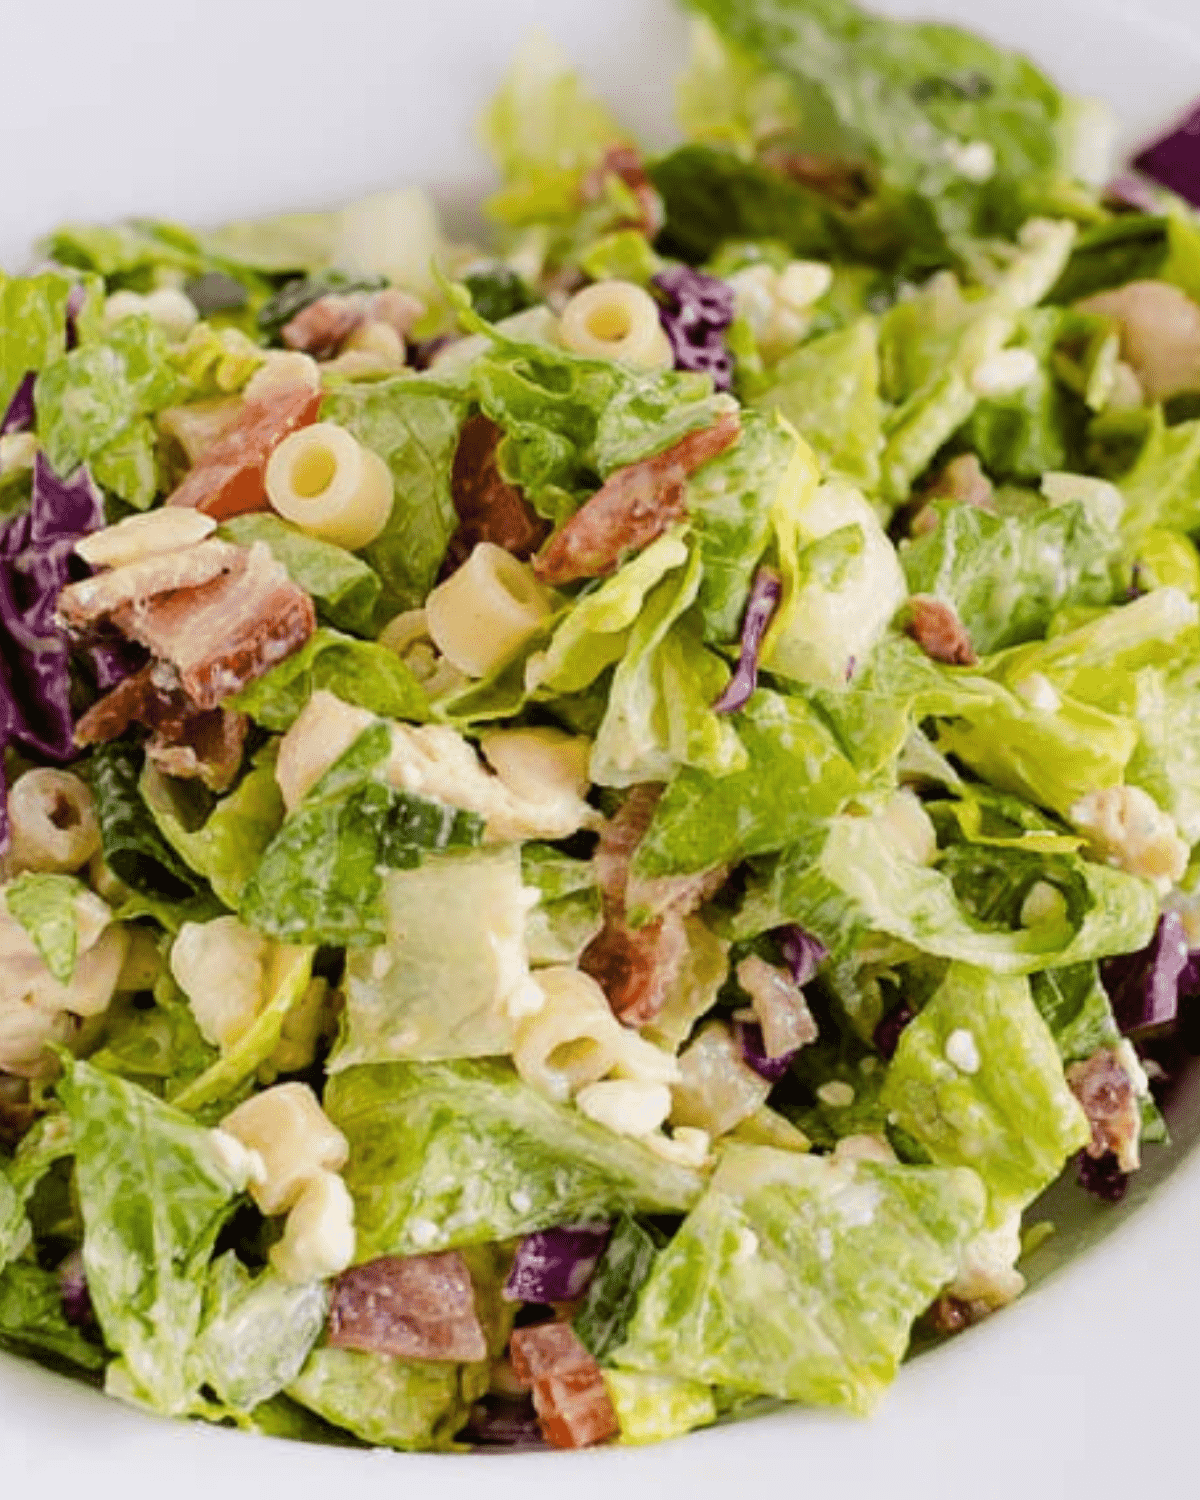 Chopped Italian salad with pasta, bacon and cheese